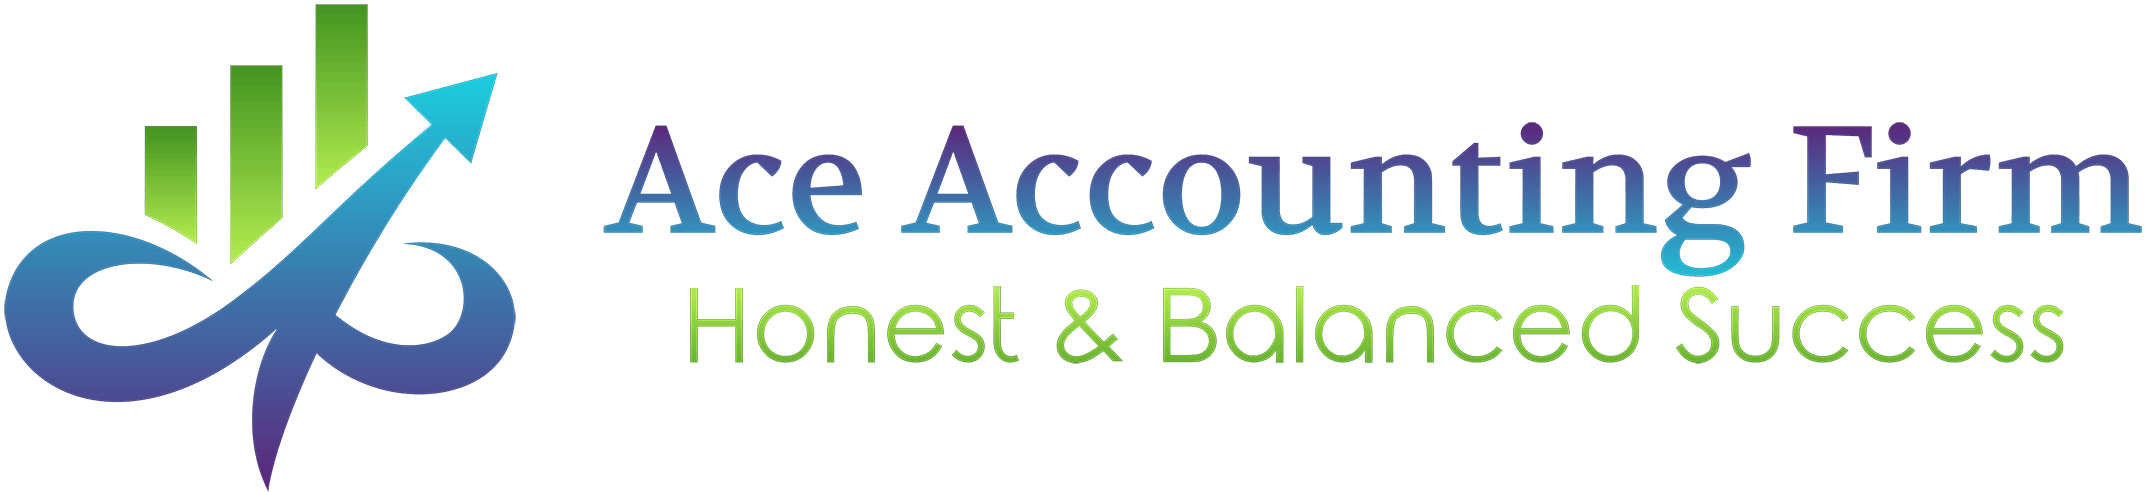 AceAccounting_logo